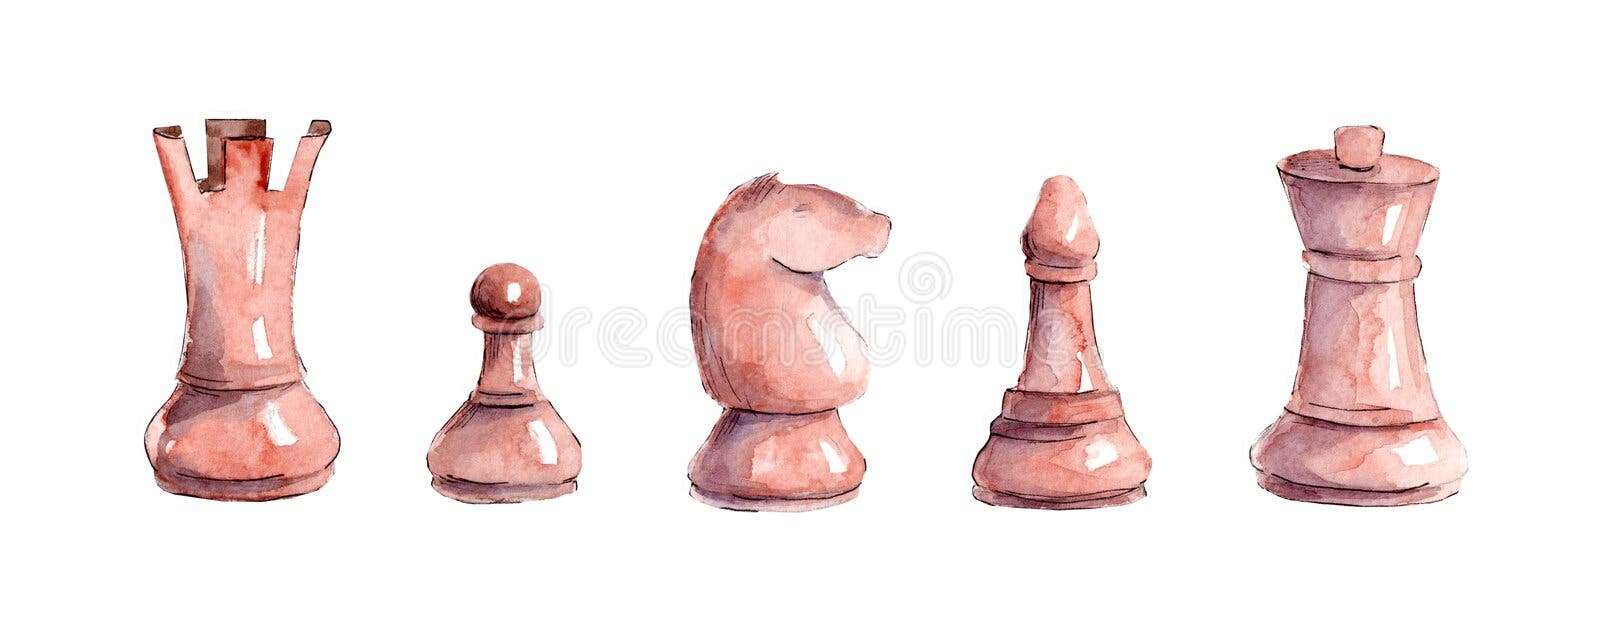 Knight Chess Sketch Stock Illustrations – 666 Knight Chess Sketch Stock  Illustrations, Vectors & Clipart - Dreamstime